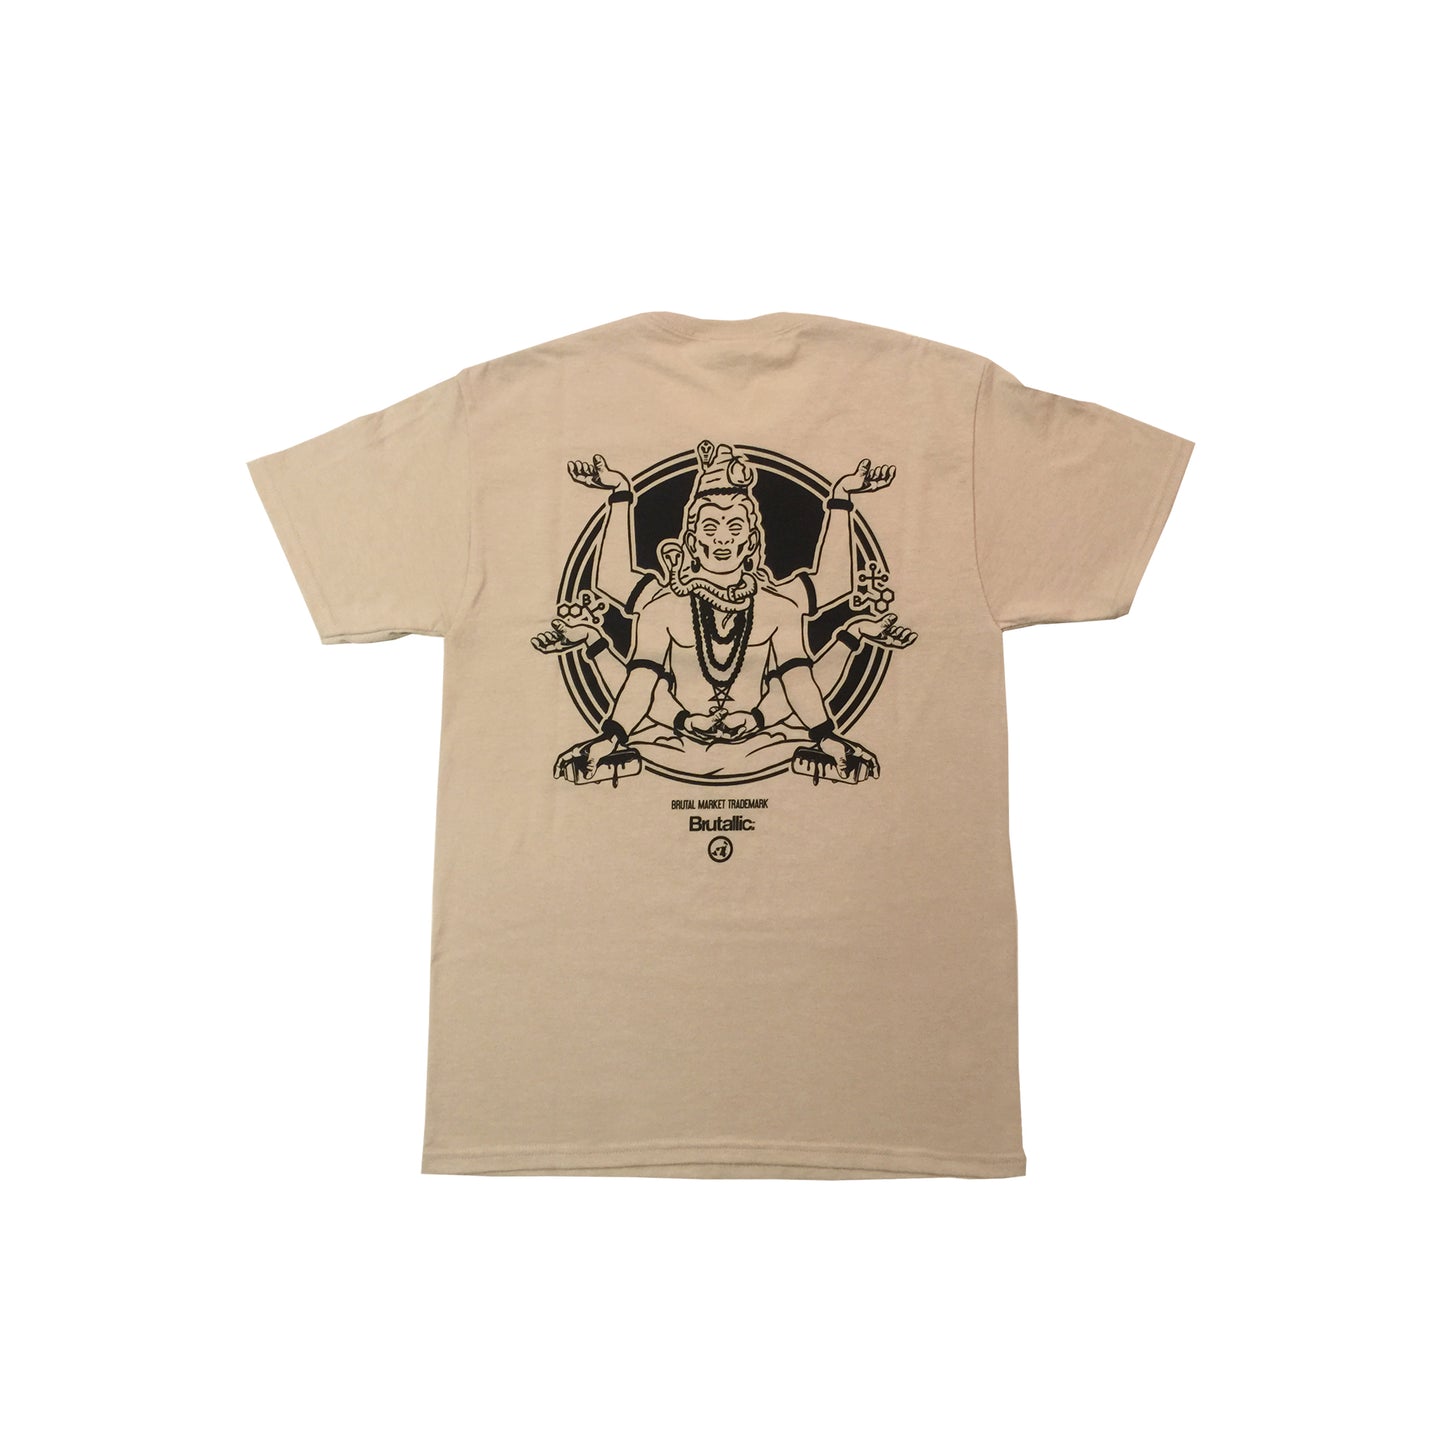 Brutallic Streetwear bubble tea tshirt with oval front logo, and buddha on the back, tan beige khaki color shirt